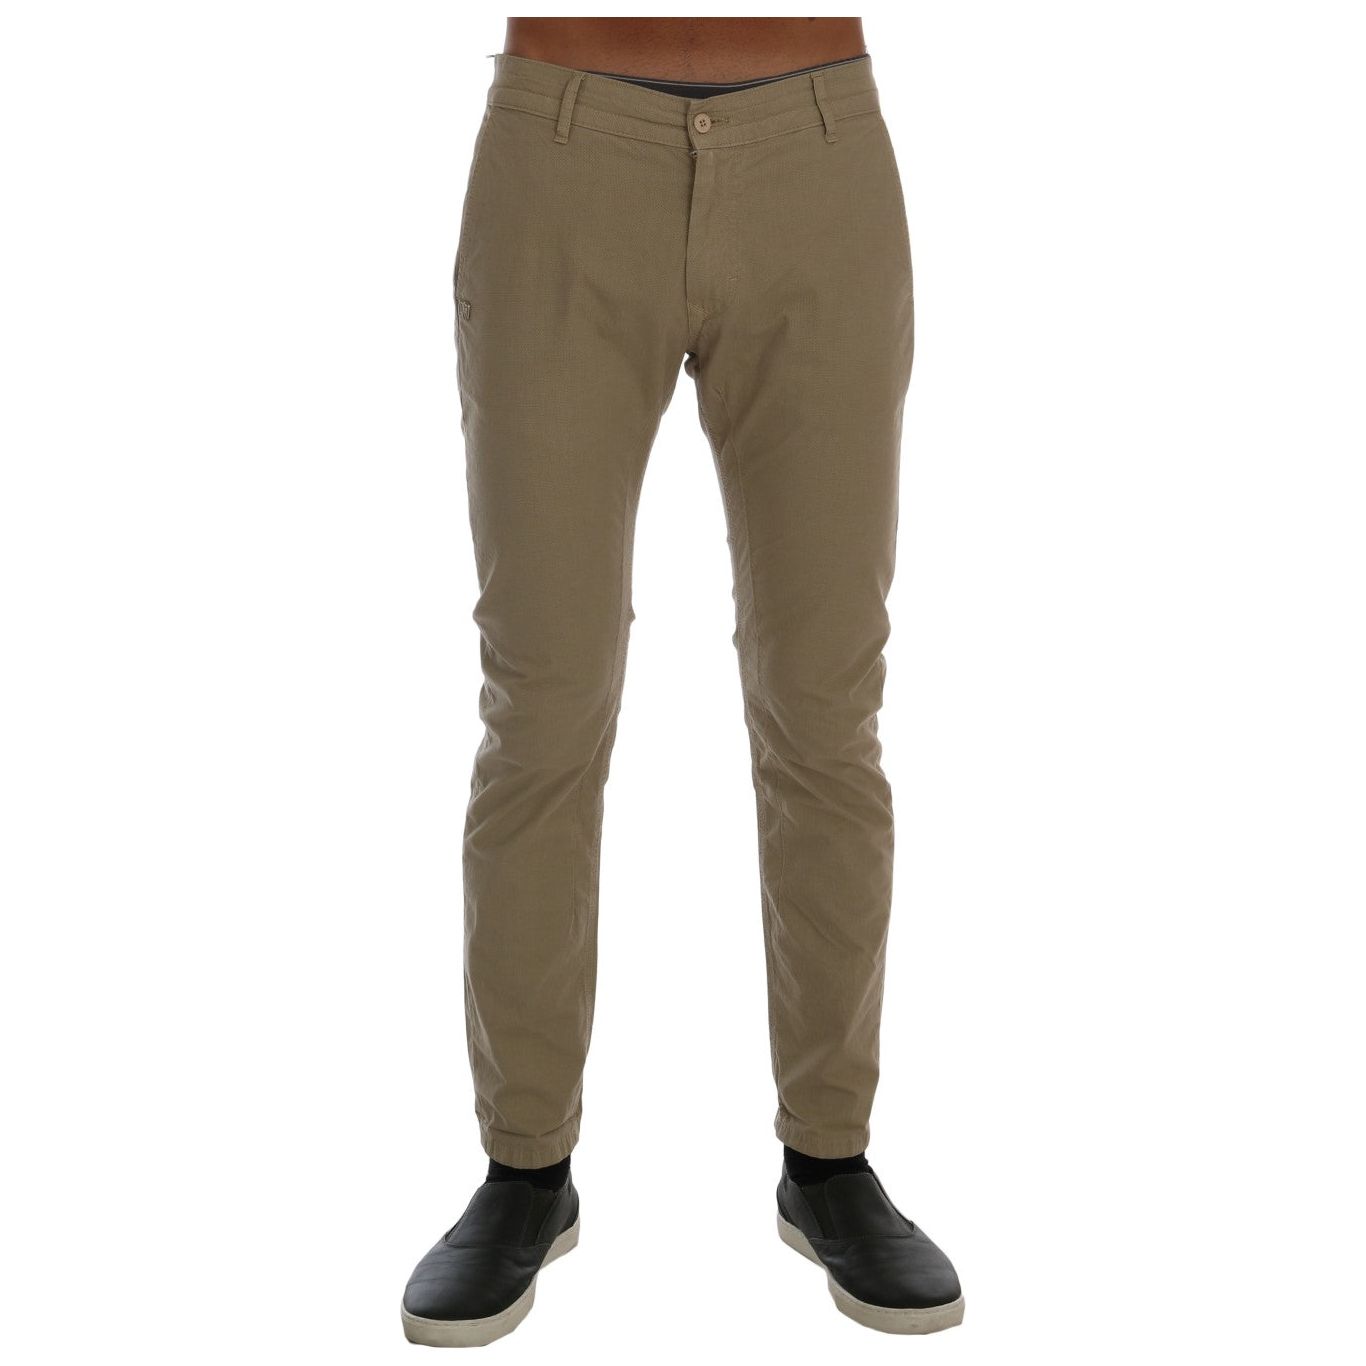 Daniele Alessandrini Beige Slim Fit Chinos for Sophisticated Style Jeans & Pants beige-cotton-stretch-slim-fit-chinos 457192-beige-cotton-stretch-slim-fit-chinos.jpg